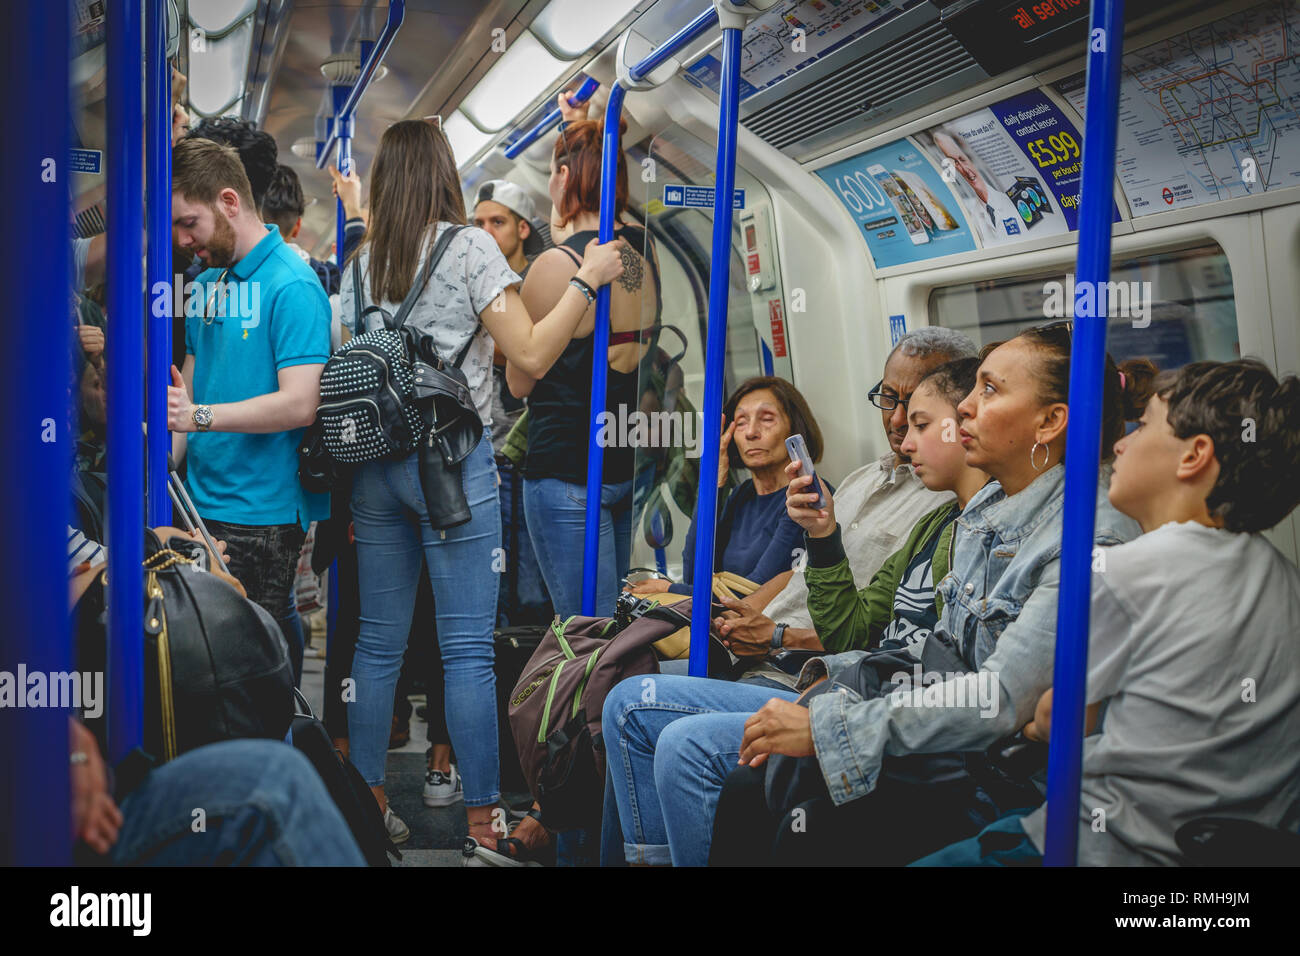 London, UK - April, 2018. People commuting on an underground train in London. The Tube handles up to 5 Million passenger per day. Stock Photo